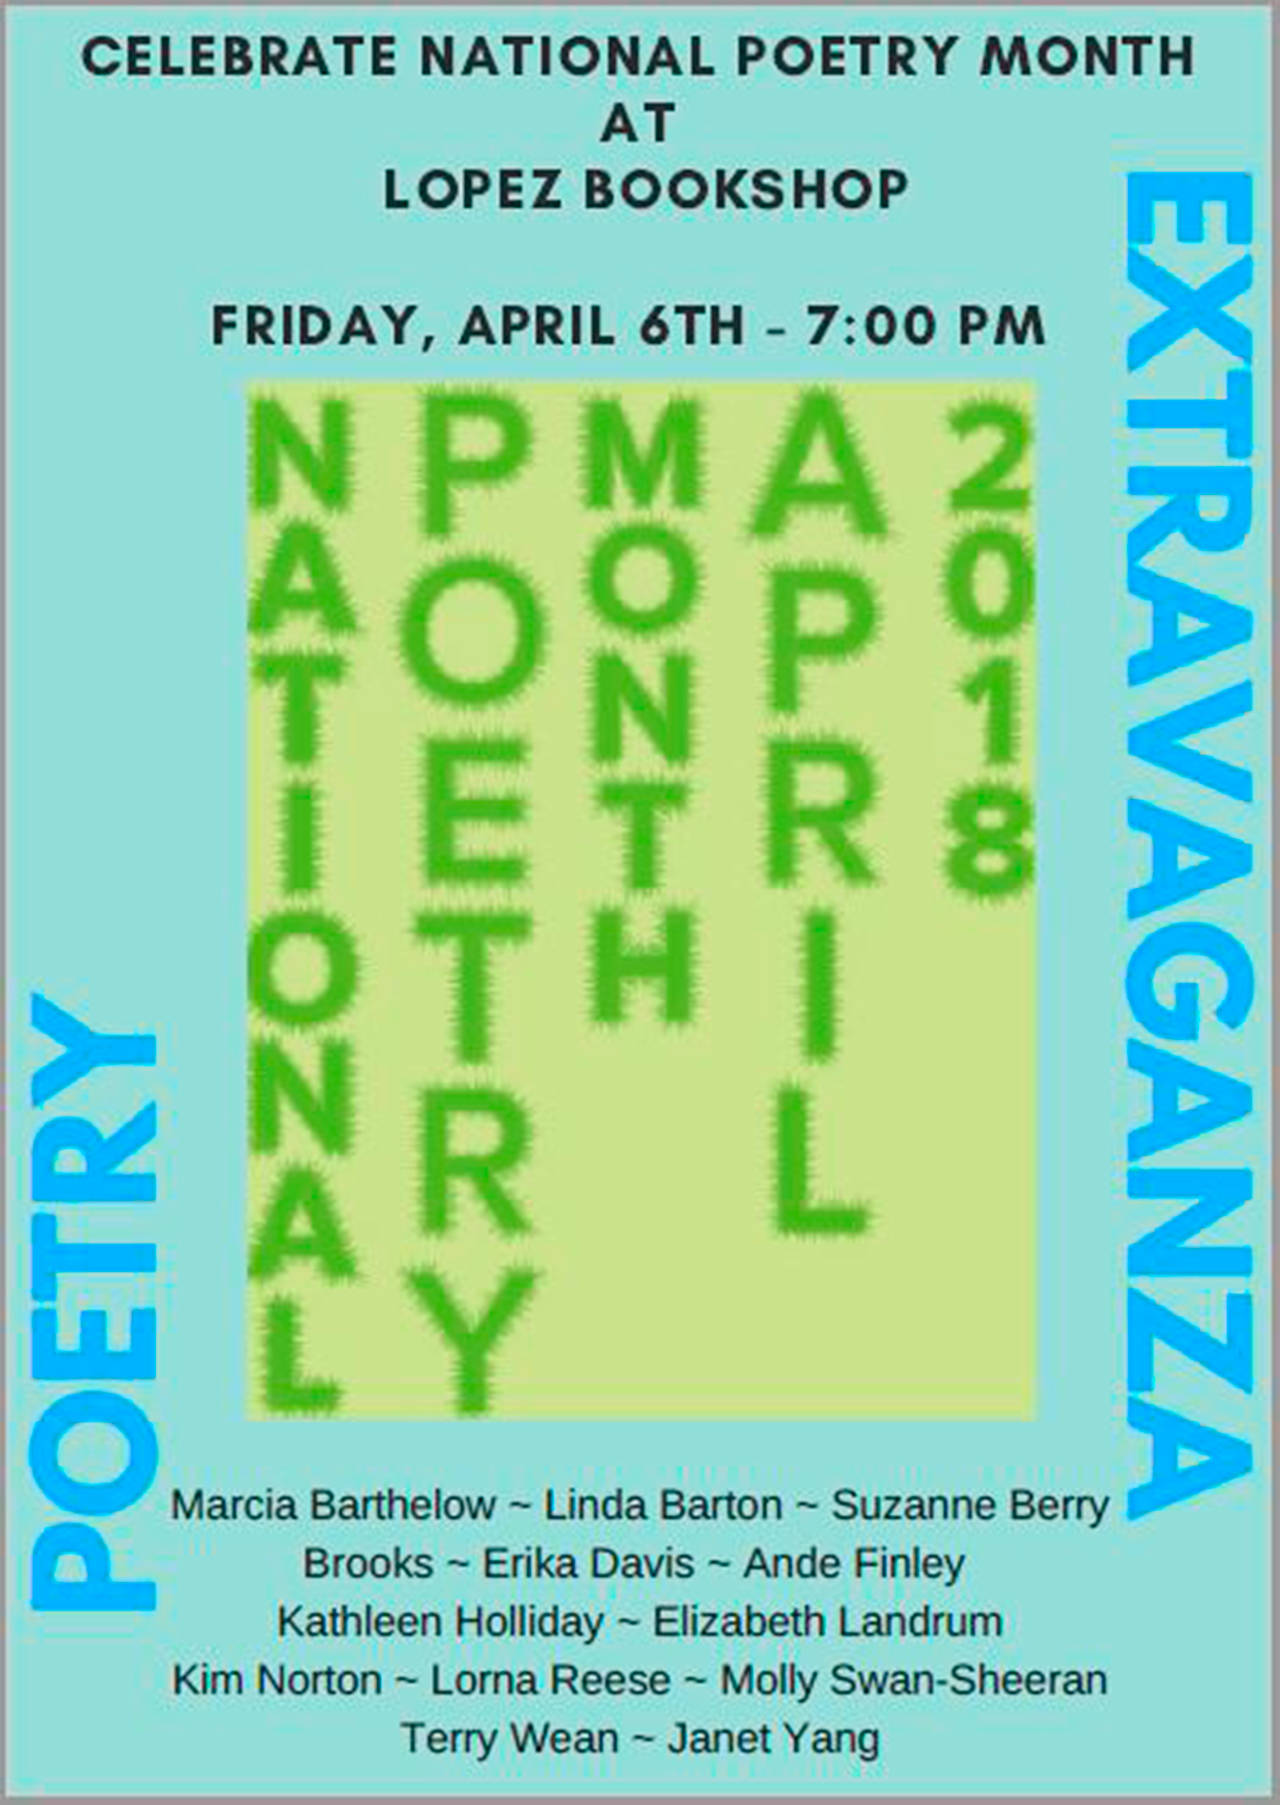 Poetry reading at Lopez Bookshop this Friday